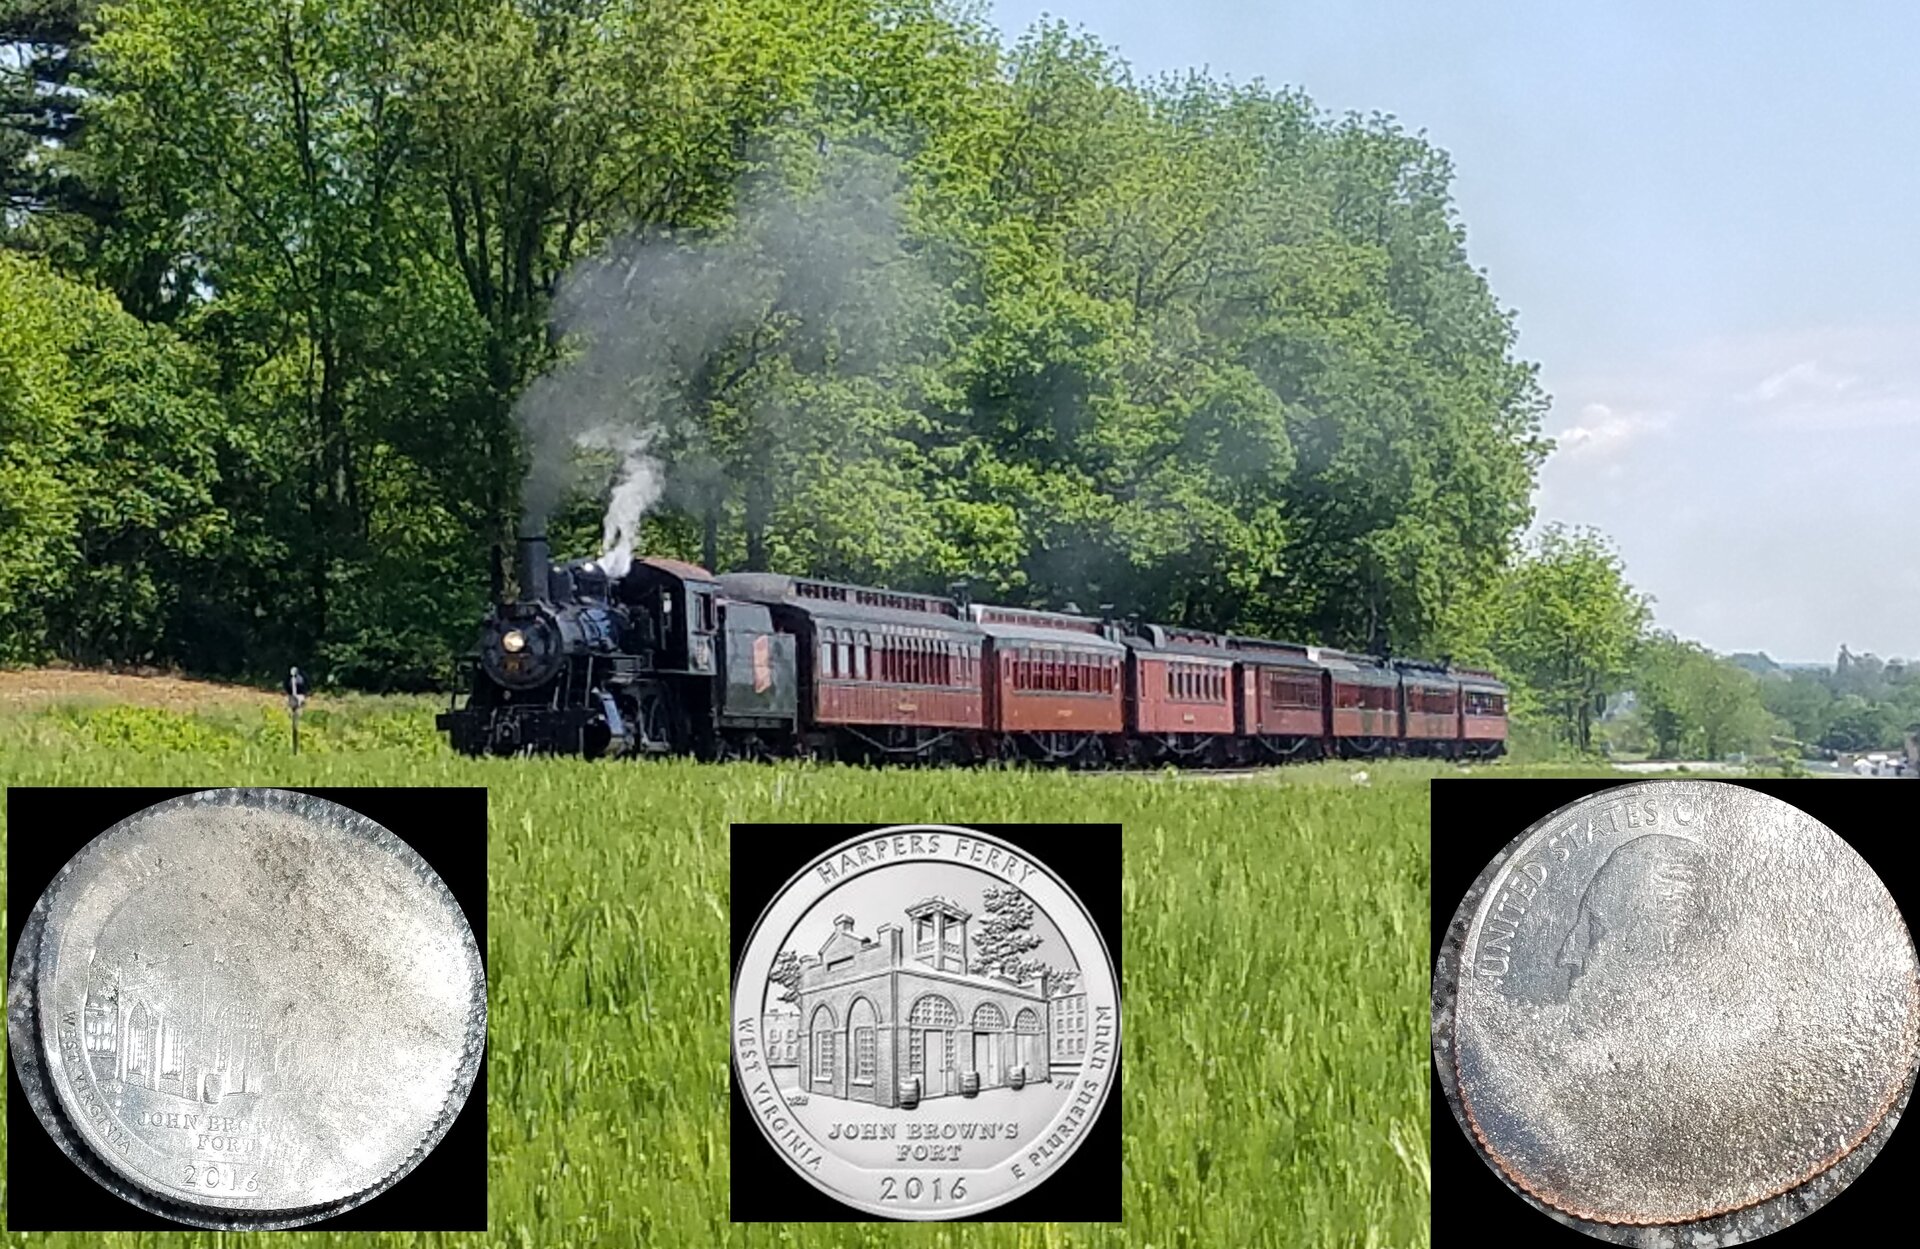 2016 Harpers Ferry Quarter squashed by 89 SRR 5b 15 19.jpg